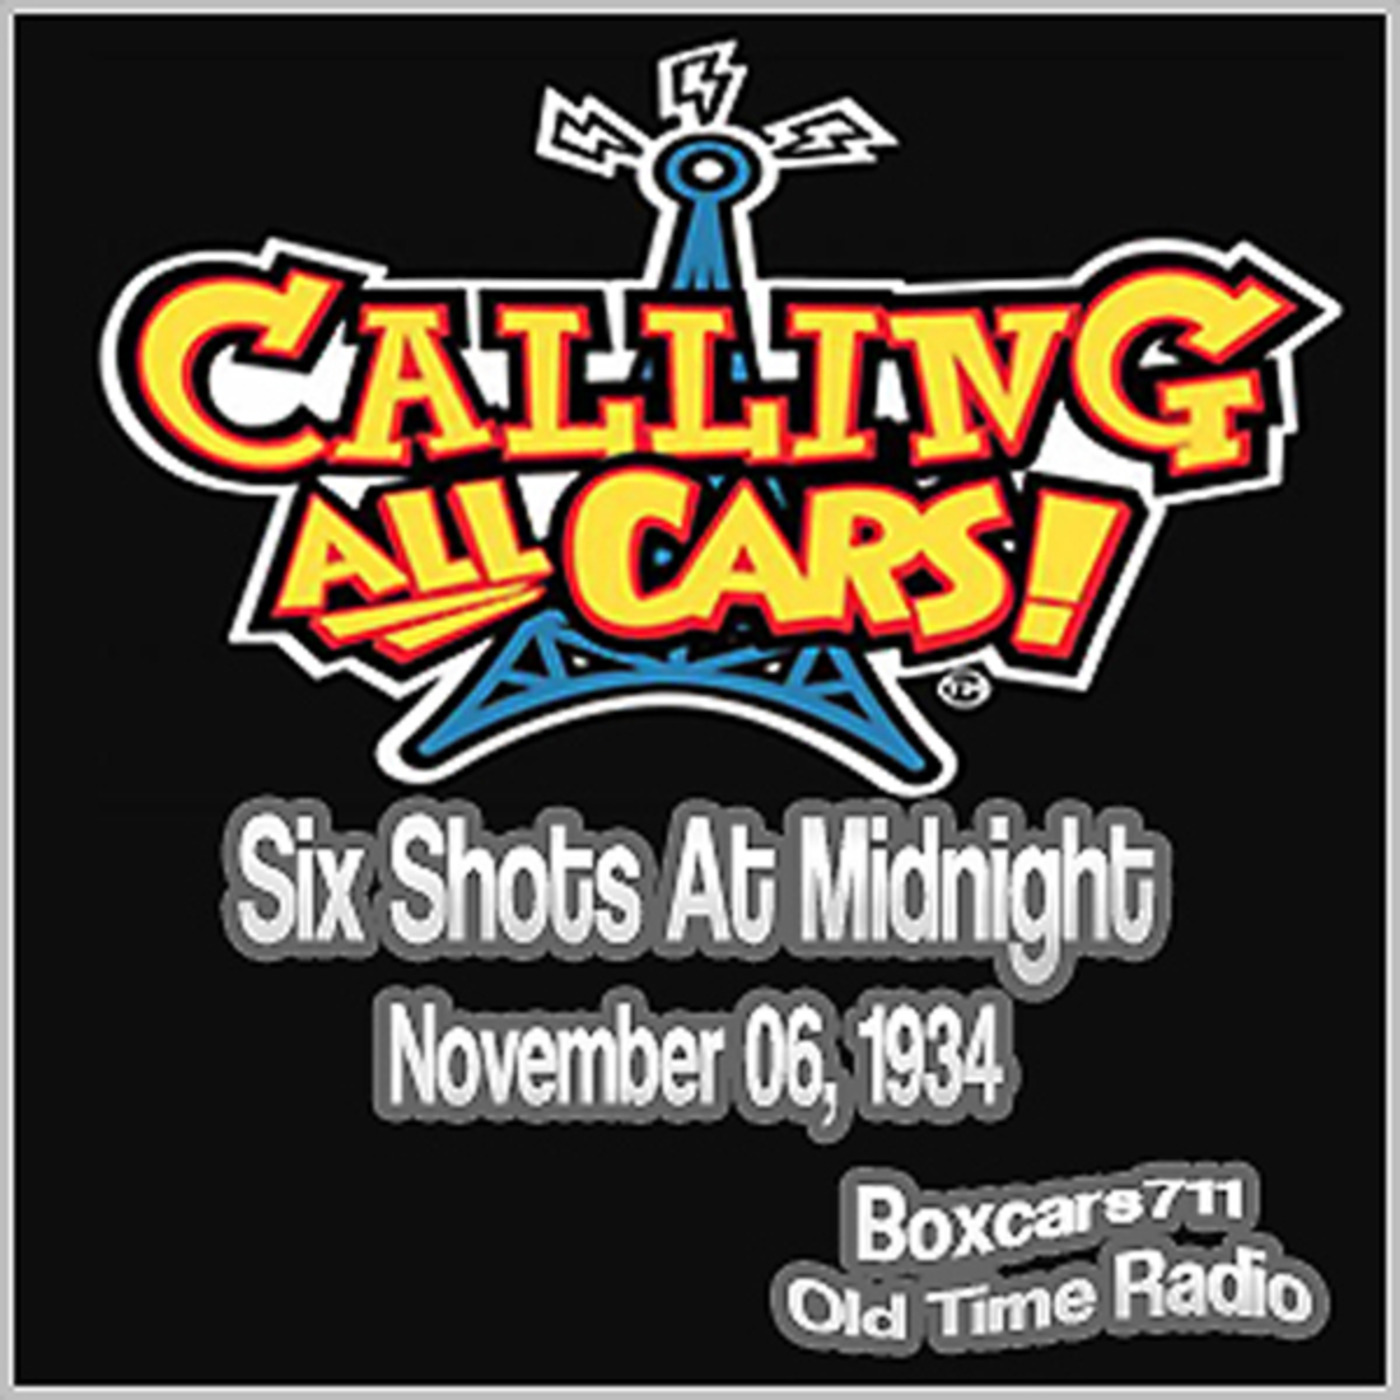 Episode 9603: Calling All Cars - 